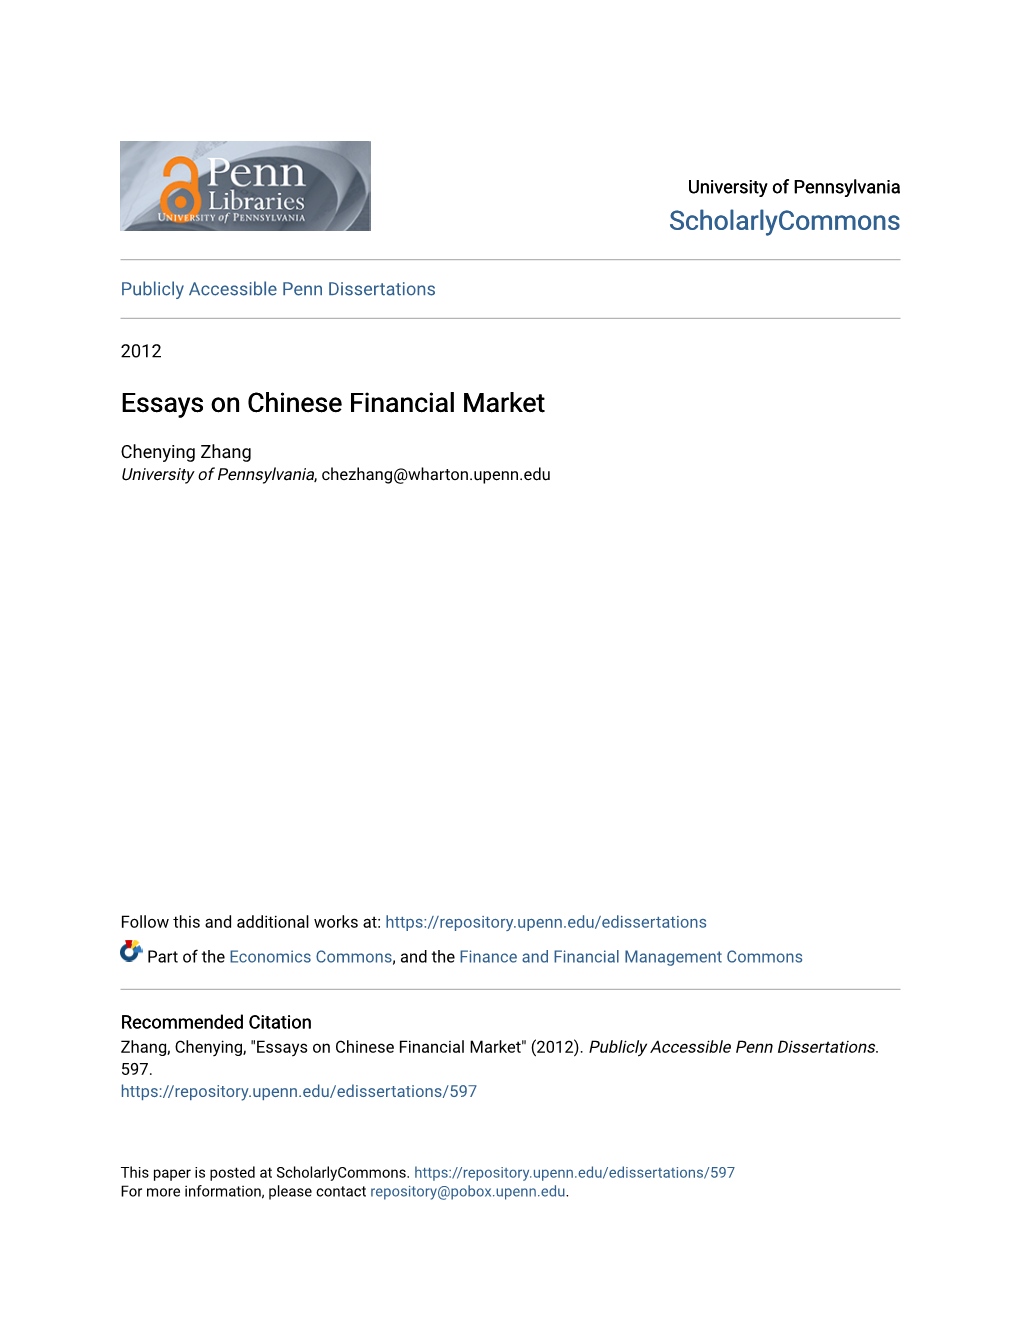 Essays on Chinese Financial Market